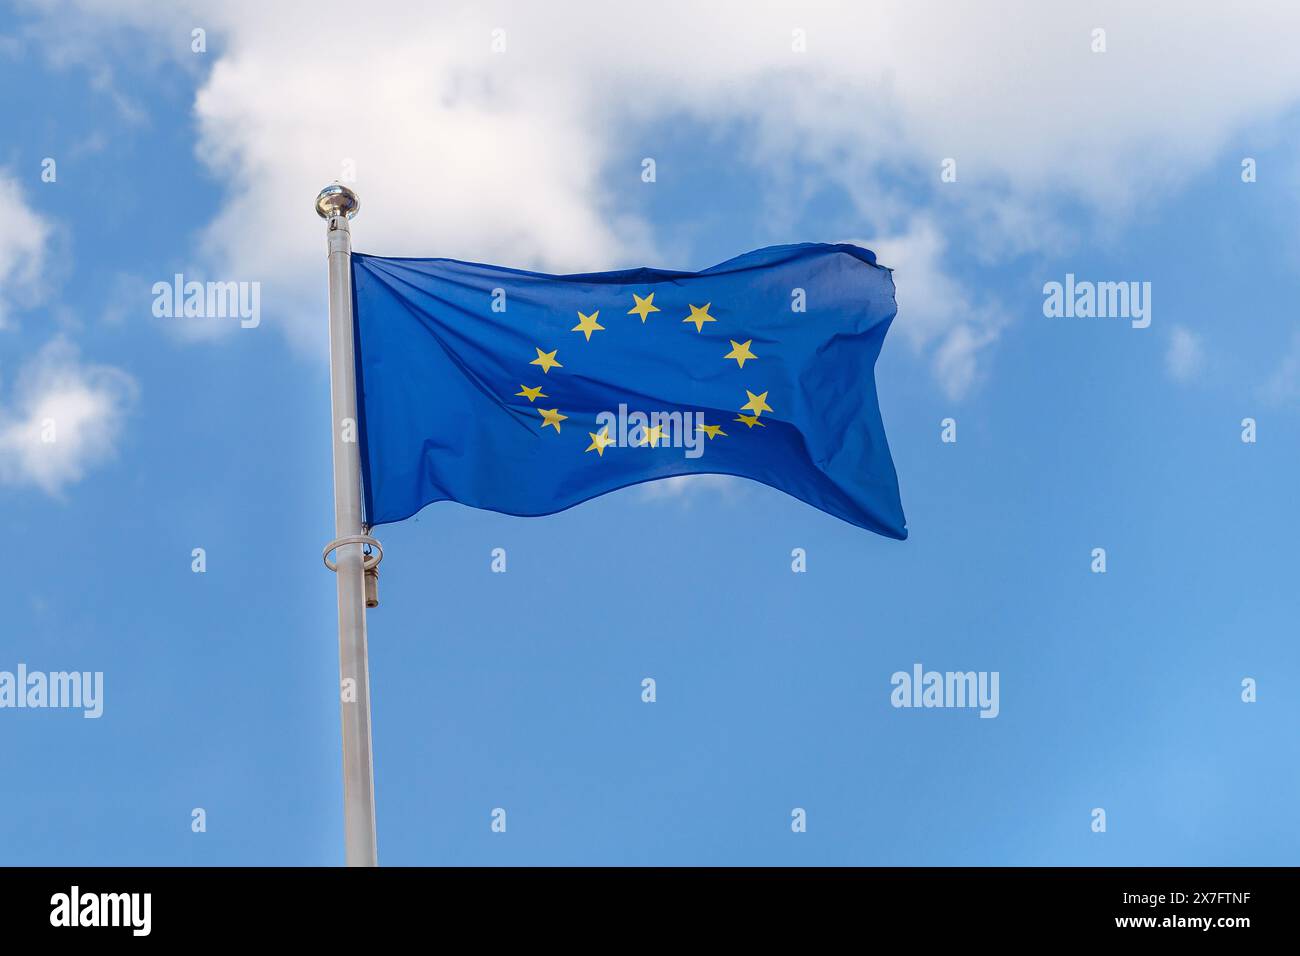 Close-up the flag of the EU, European Union flies against the background of a cloudy blue sky Stock Photo